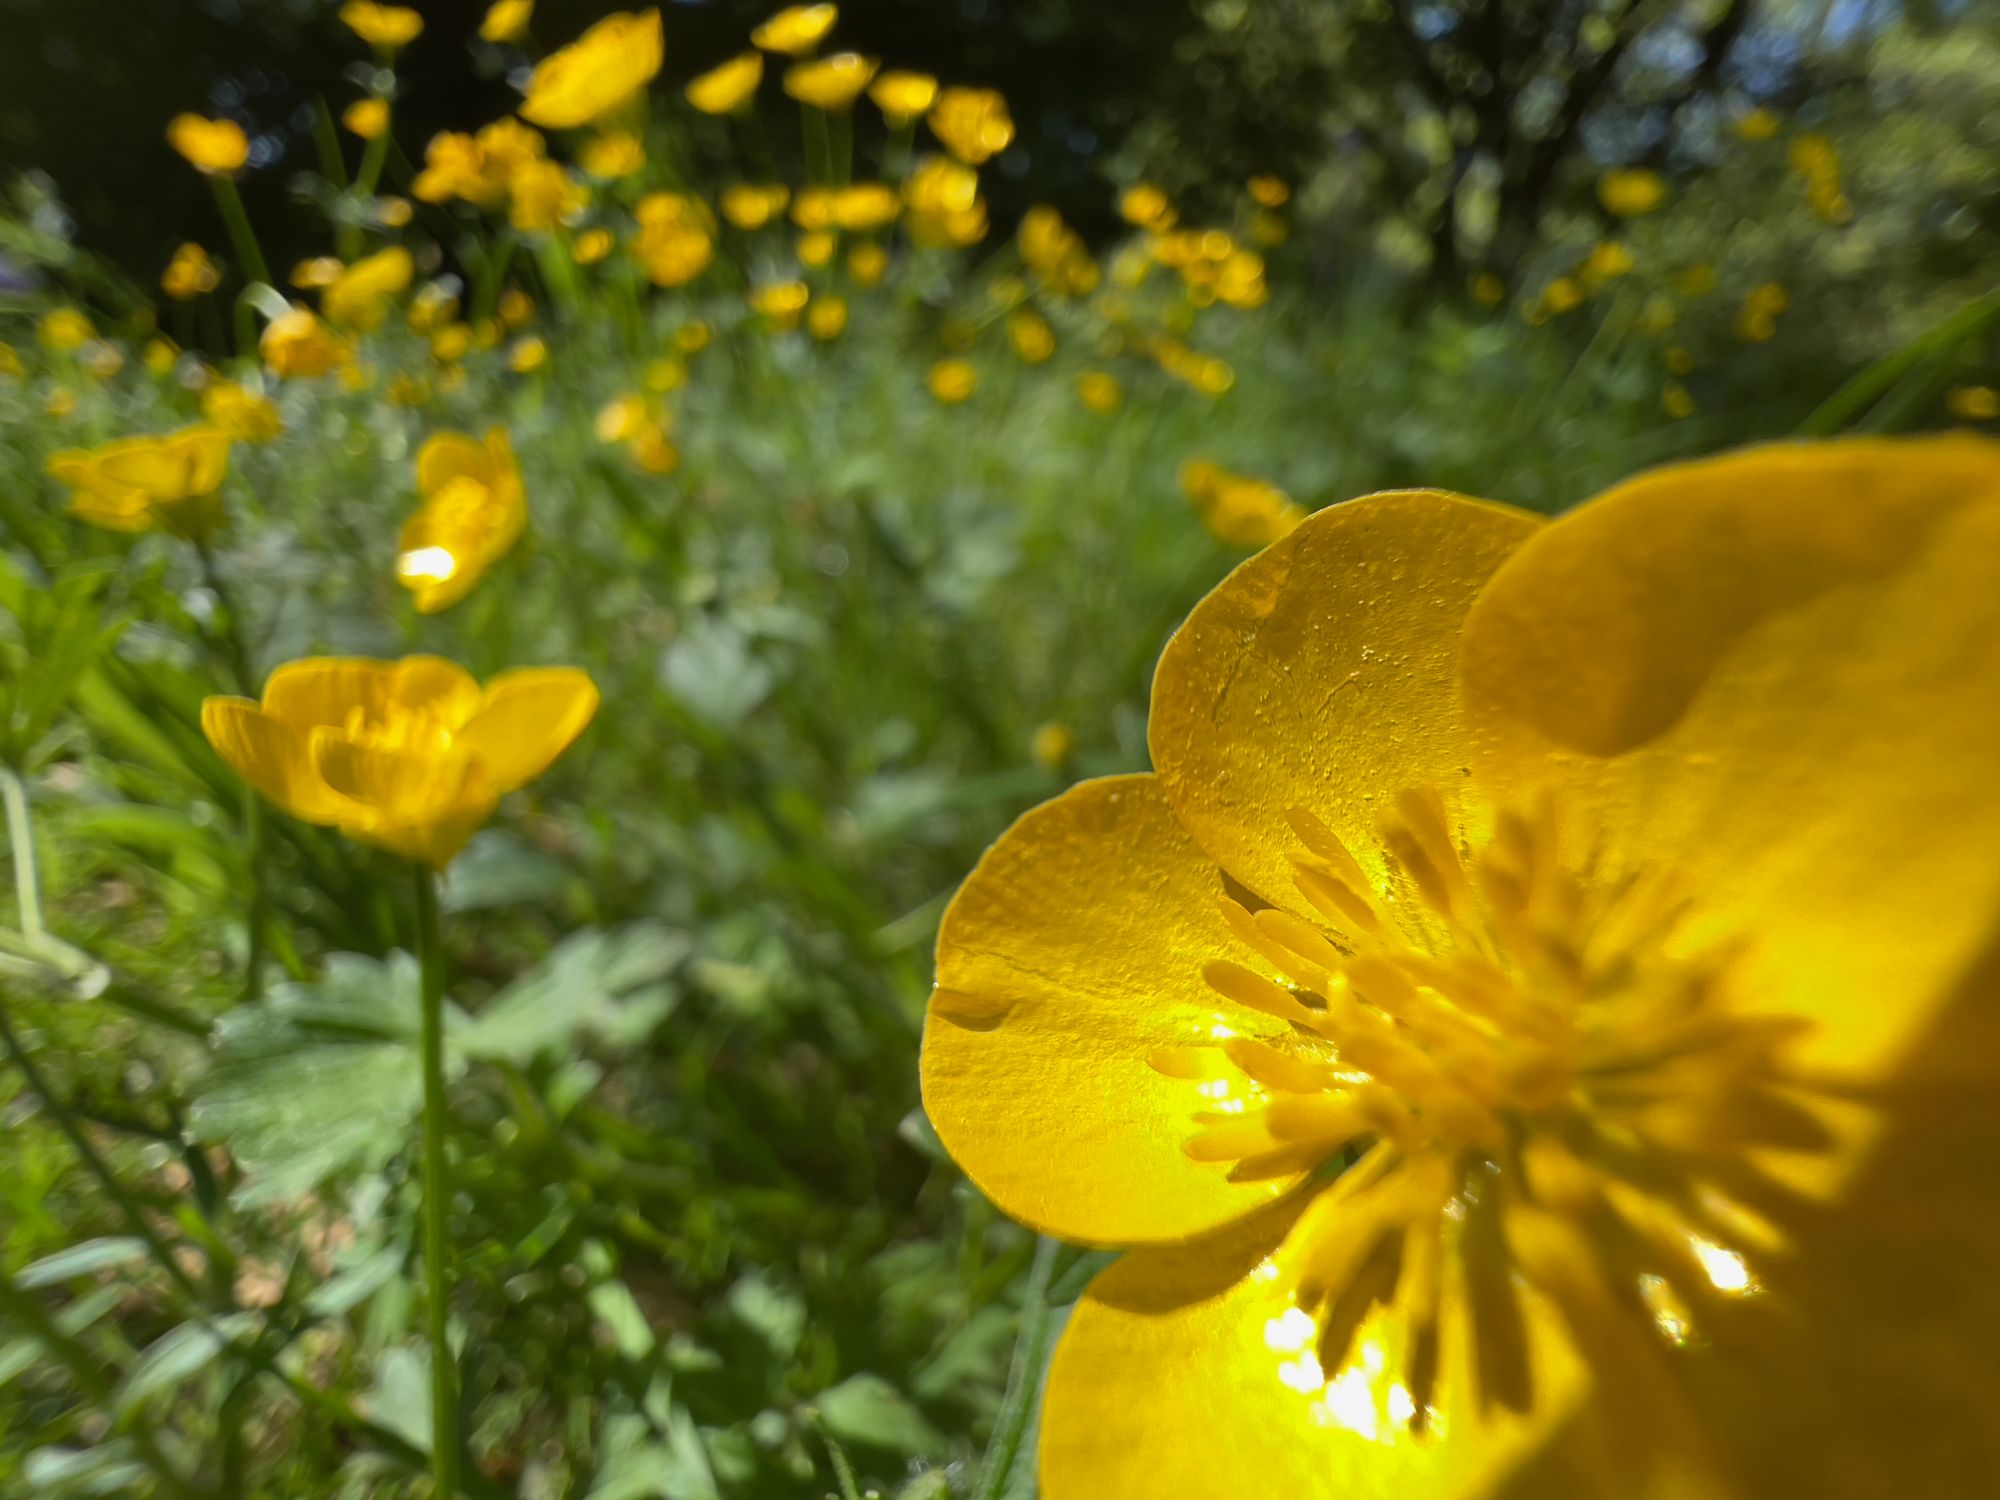 A grassy area peppered with bright yellow buttercups in soft focus.